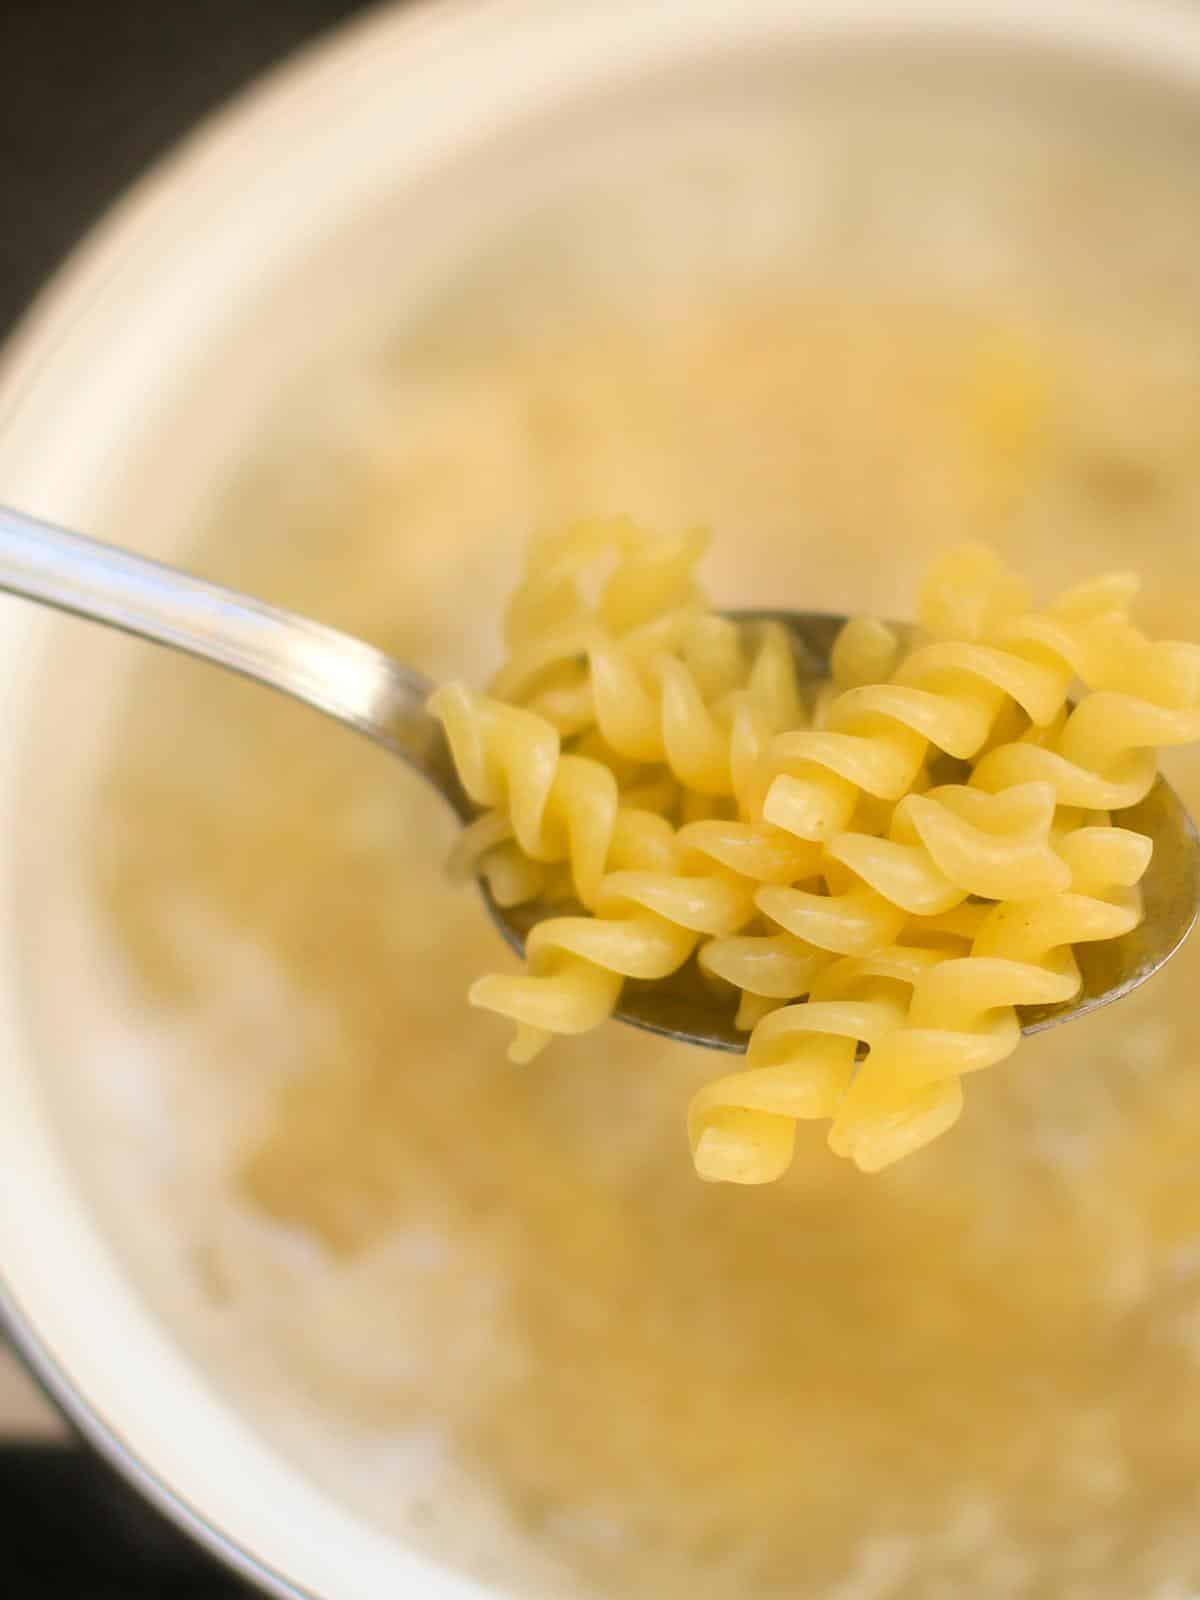 Rotini pasta boiling in a pot on the stove.